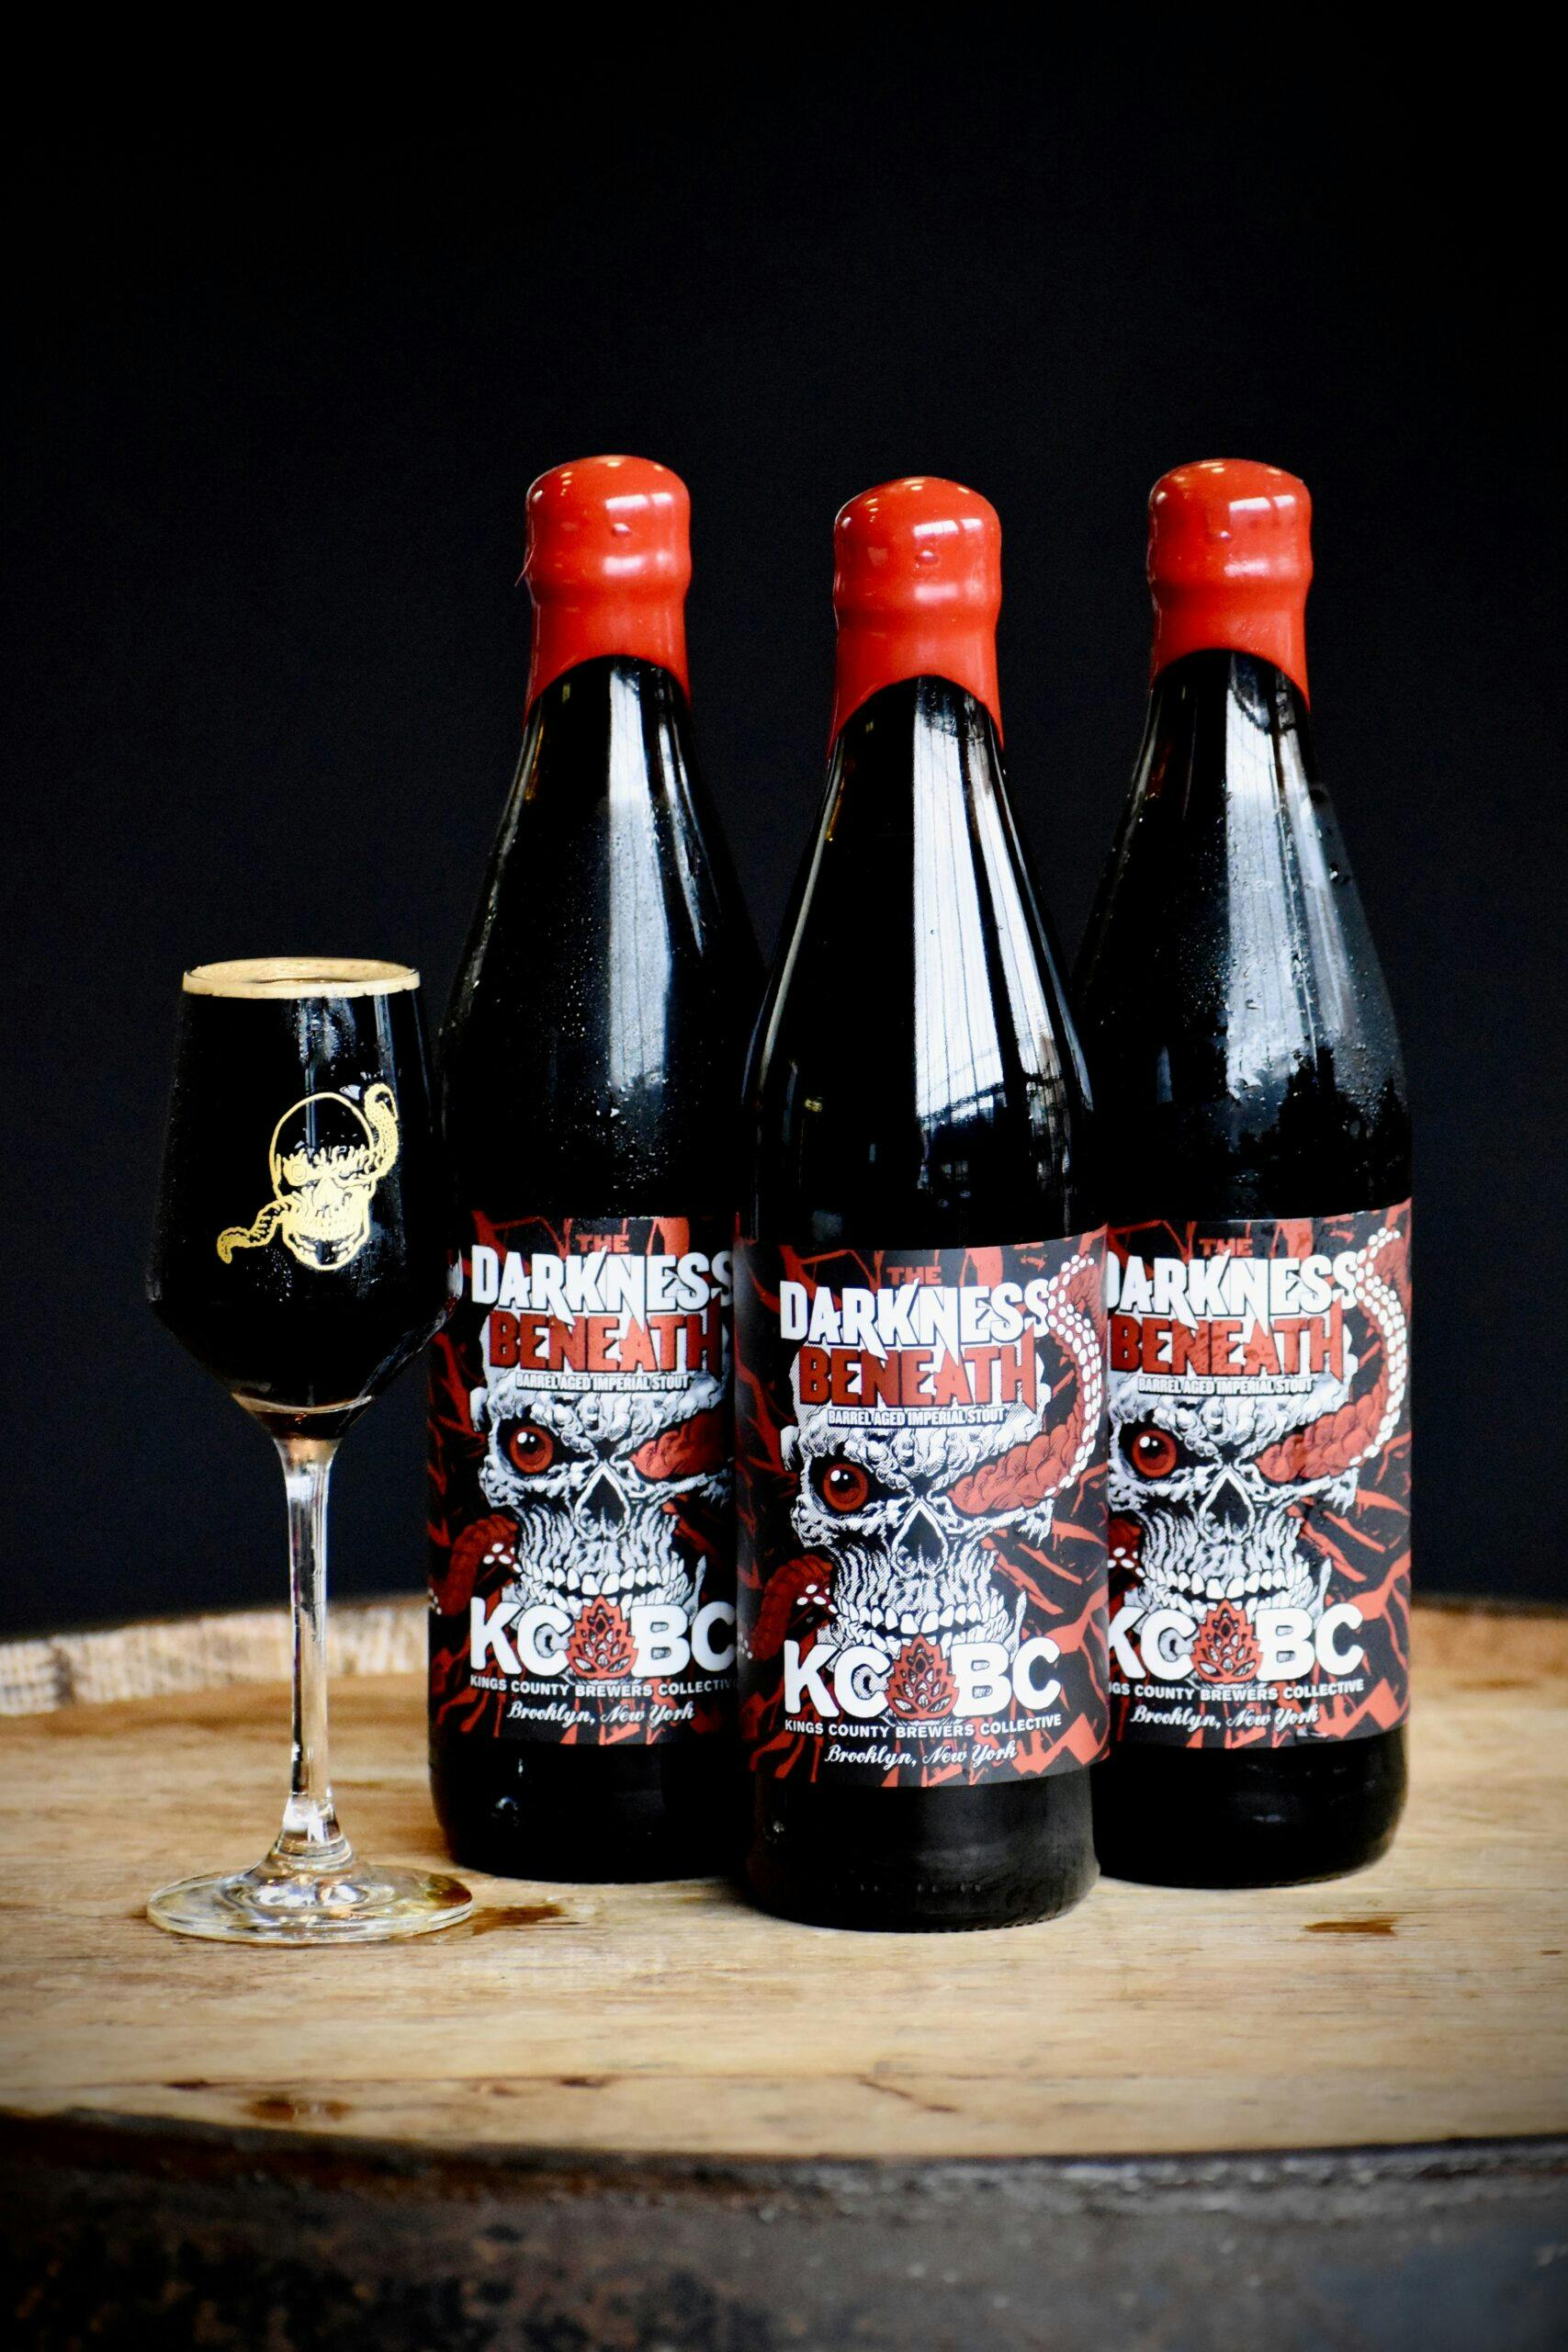 Igor's Dream Russian Imperial Stout – Rye Whiskey Barrel Aged